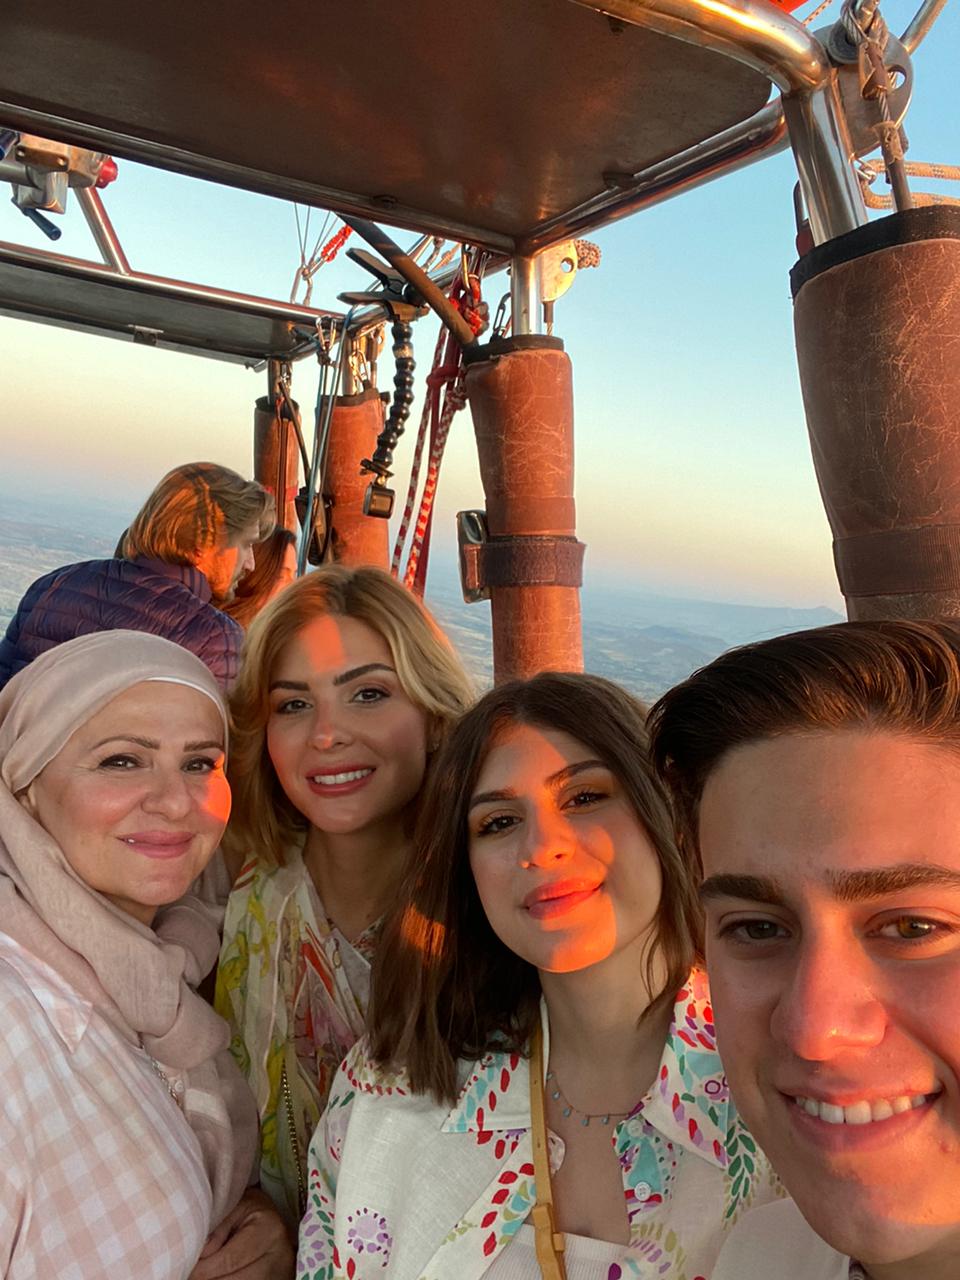 Ahmad and Joudi take a quick photo with their mother and older sister, Leena, during the hot air balloon ride. Leena lives in Dubai where she works as an Instagram influencer, and this was their first time seeing her in almost three years. “I was shocked to see her because I hadn’t seen her in so long. When we saw each other, we both kind of ran towards one another,” Joudi said. “She was in Cappadocia for the [music] festival because [a brand] reached out and invited her so that she can post about it.”